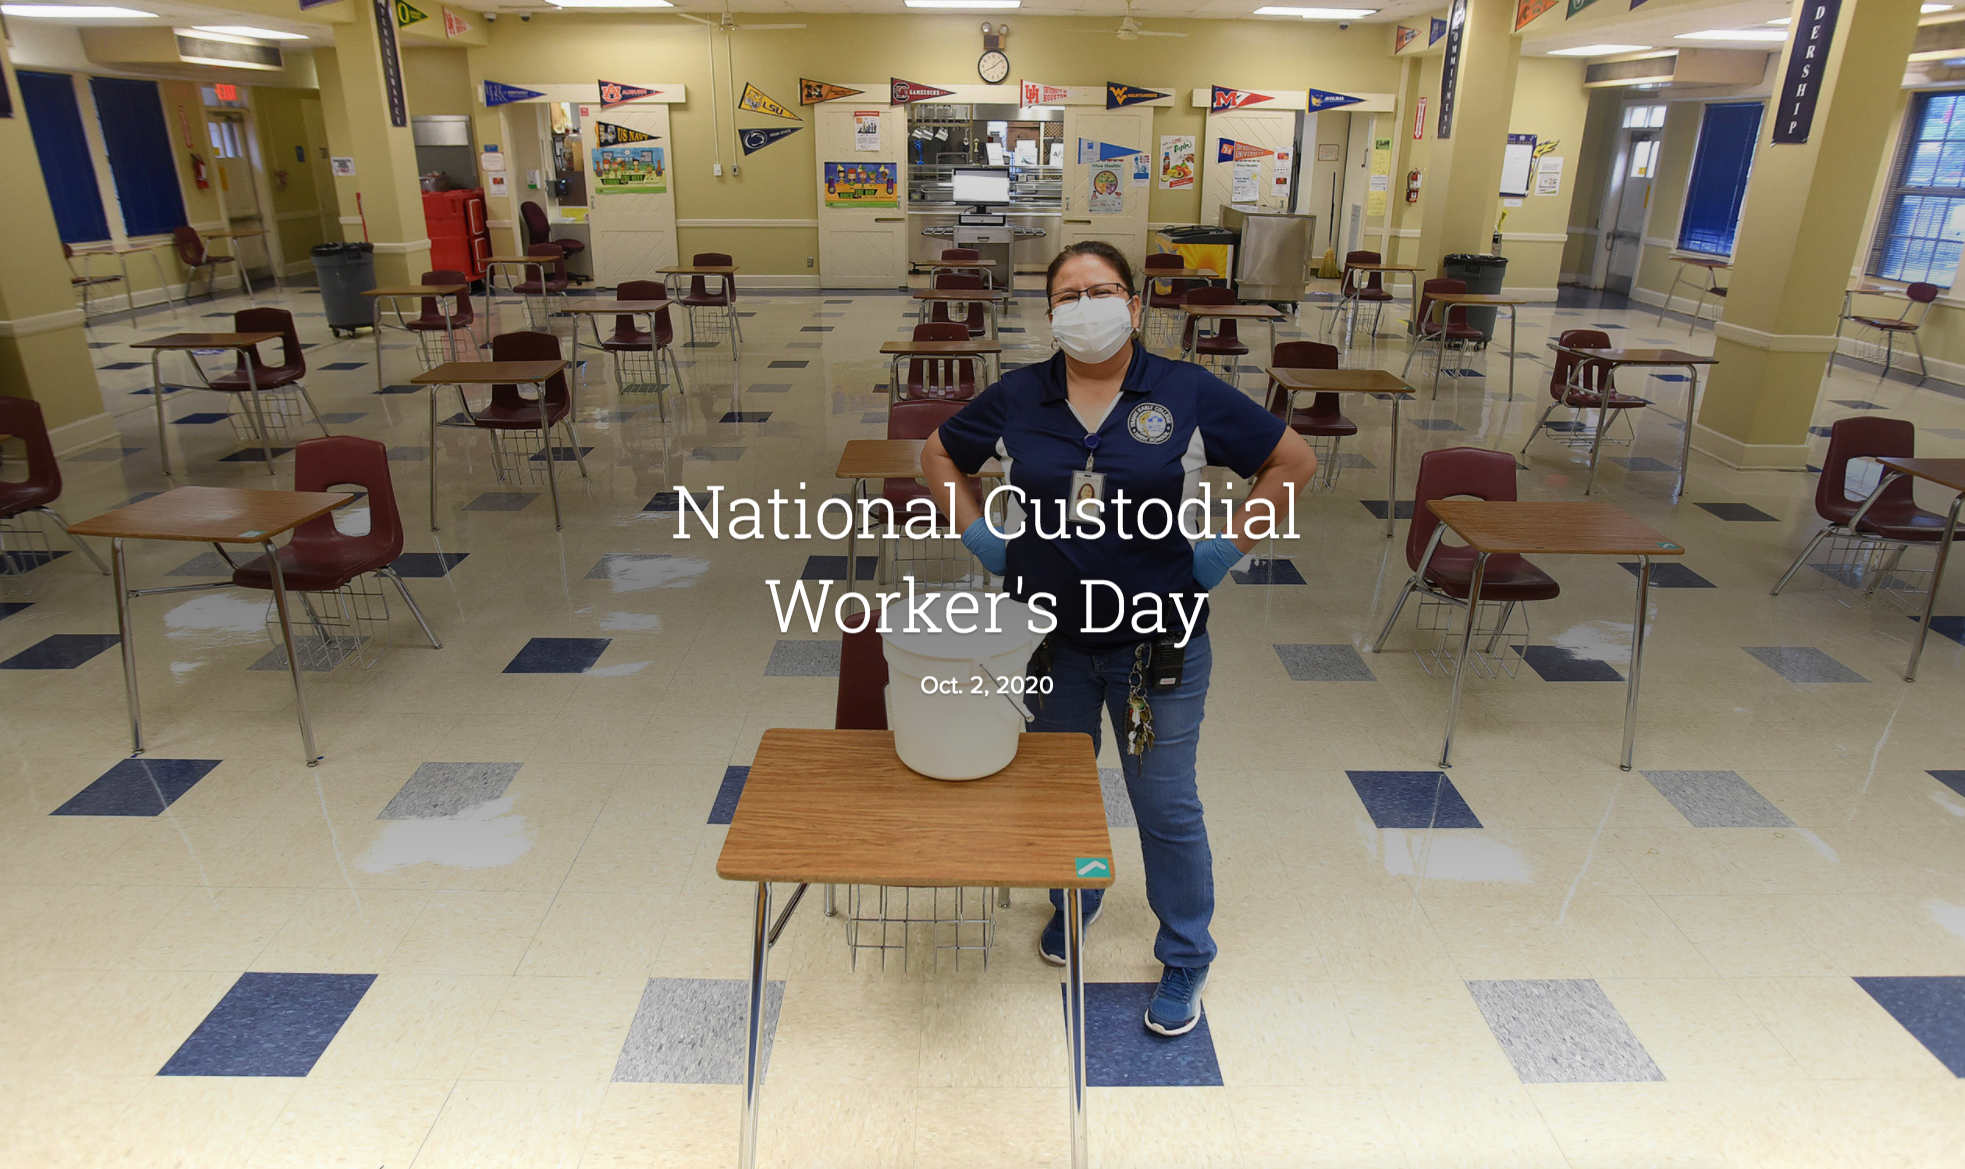 National Custodial Worker's Day